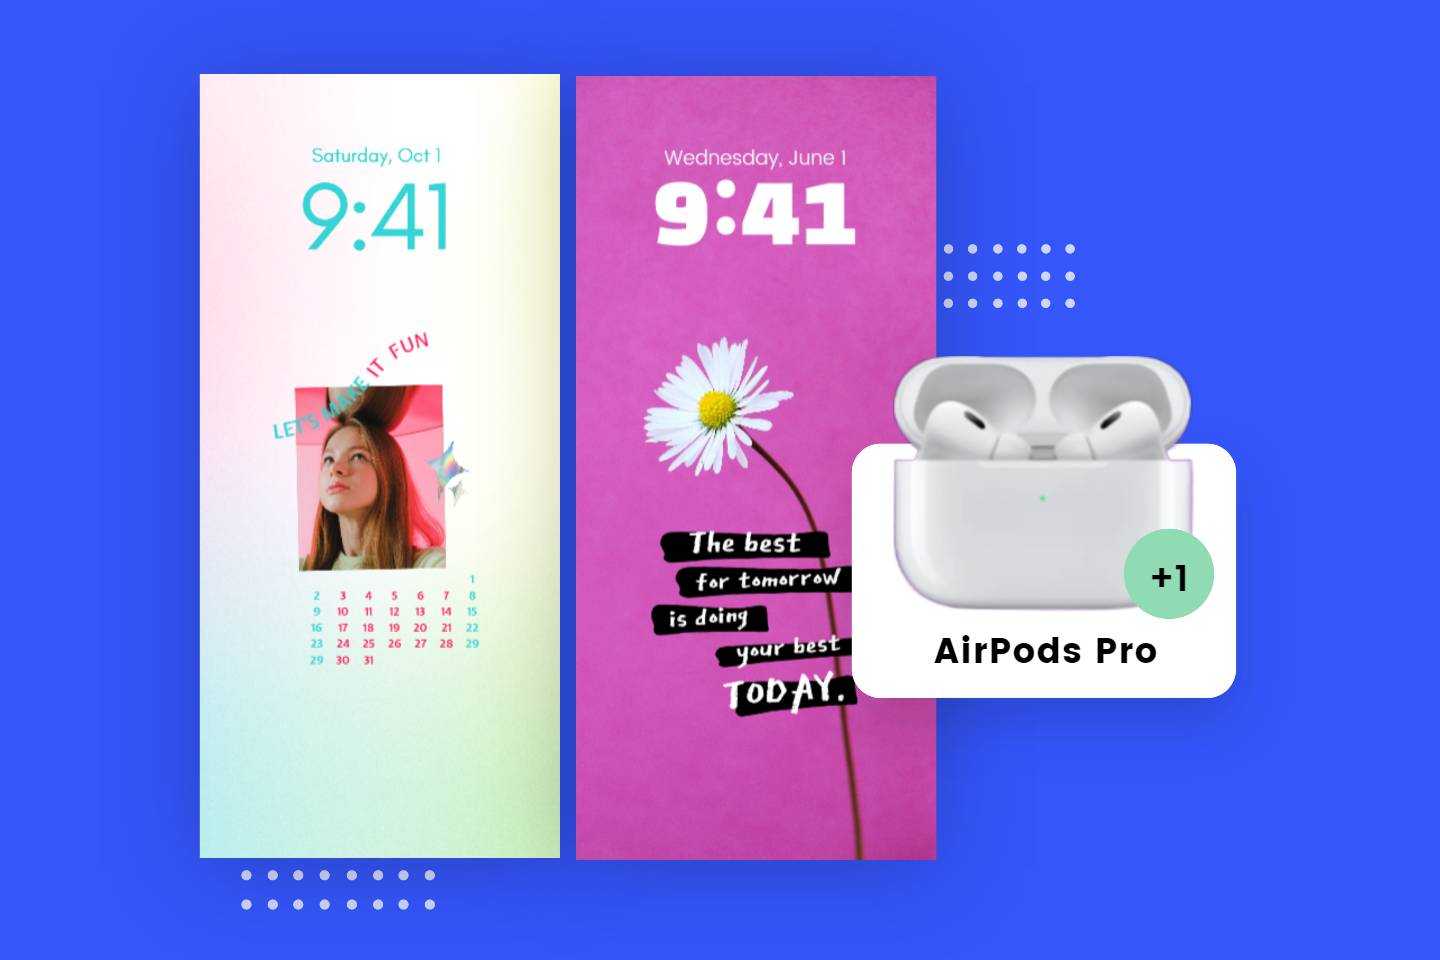 Fotor wallpaper design competition and its reward Air Pods Pro